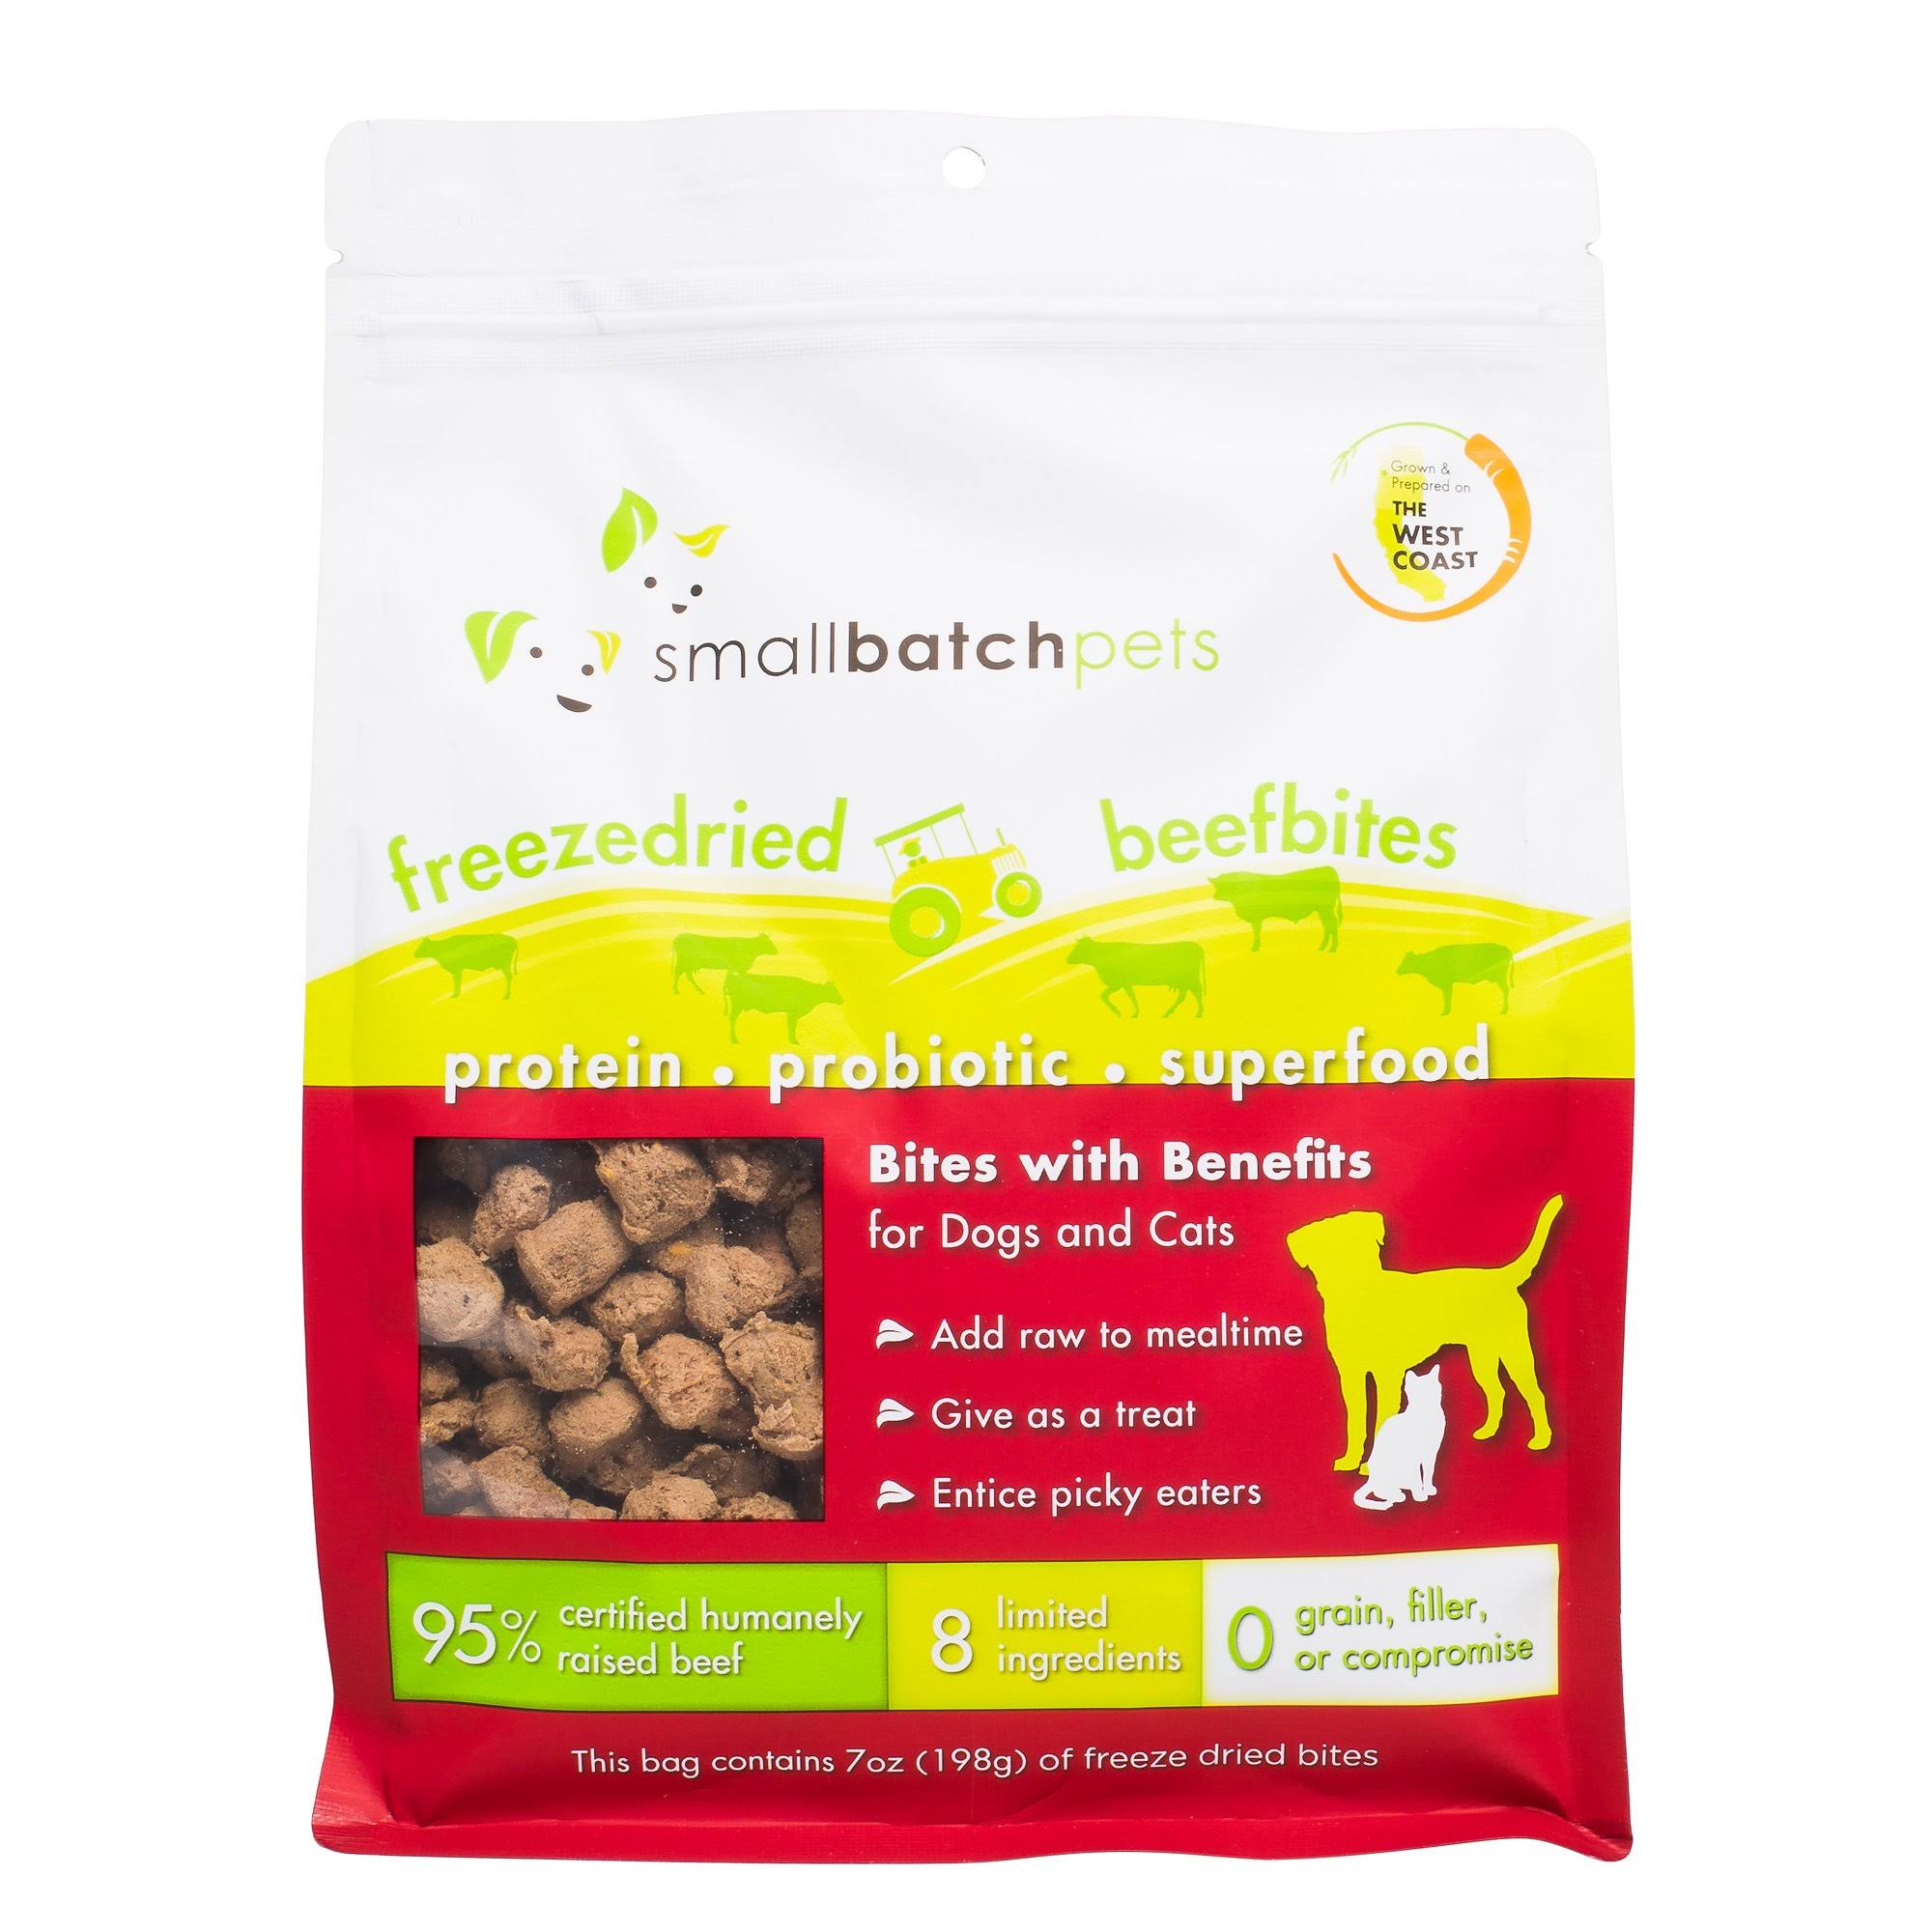 Smallbatch Pets Freeze-Dried Beef Bites for Dogs & Cats, 7 oz, Made I